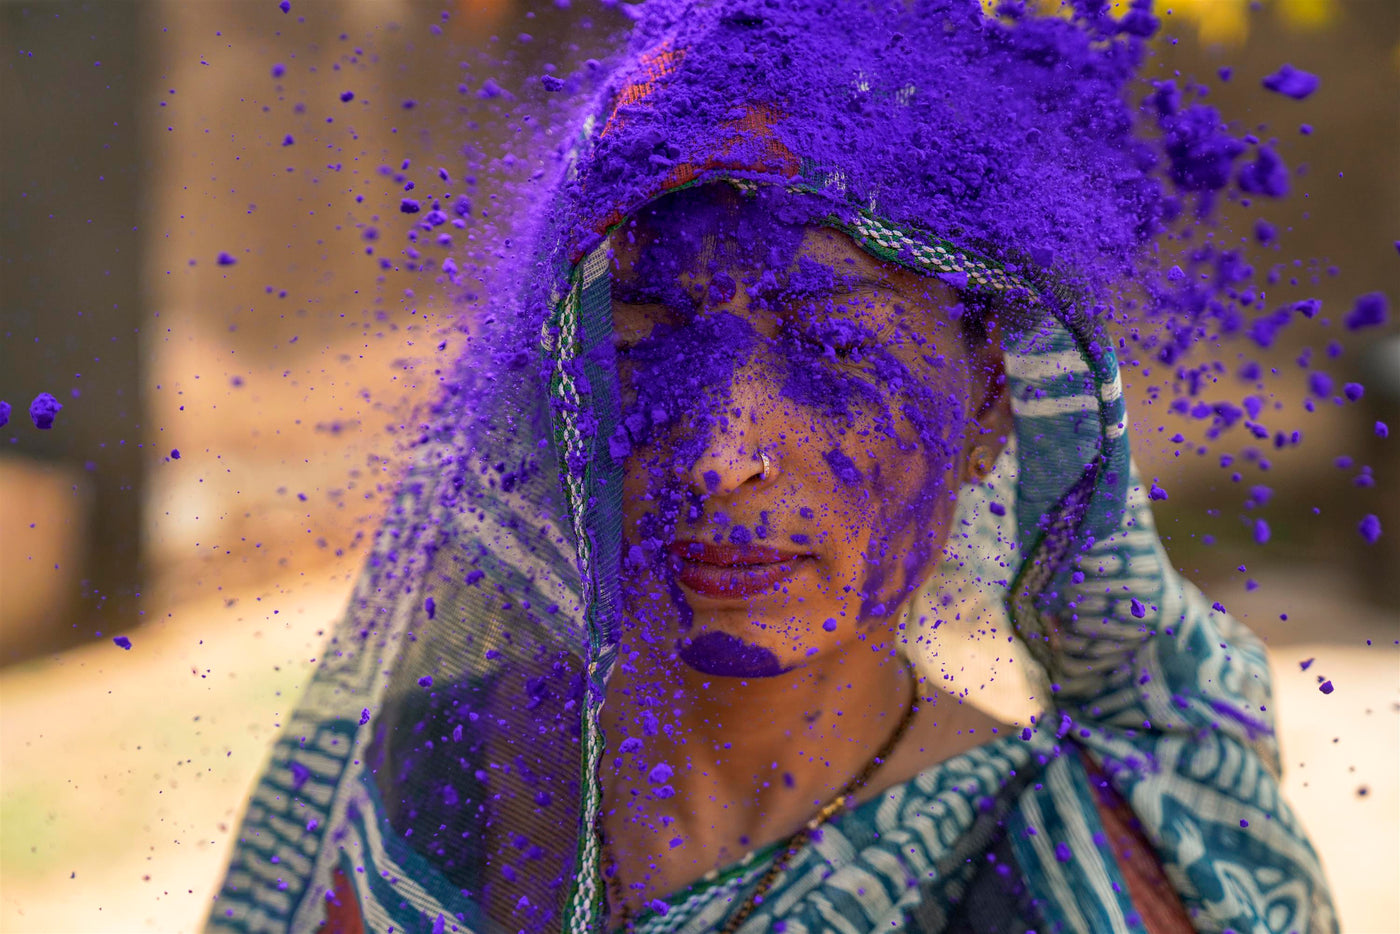 India Welcomes Spring with Holi, the Festival of Colors